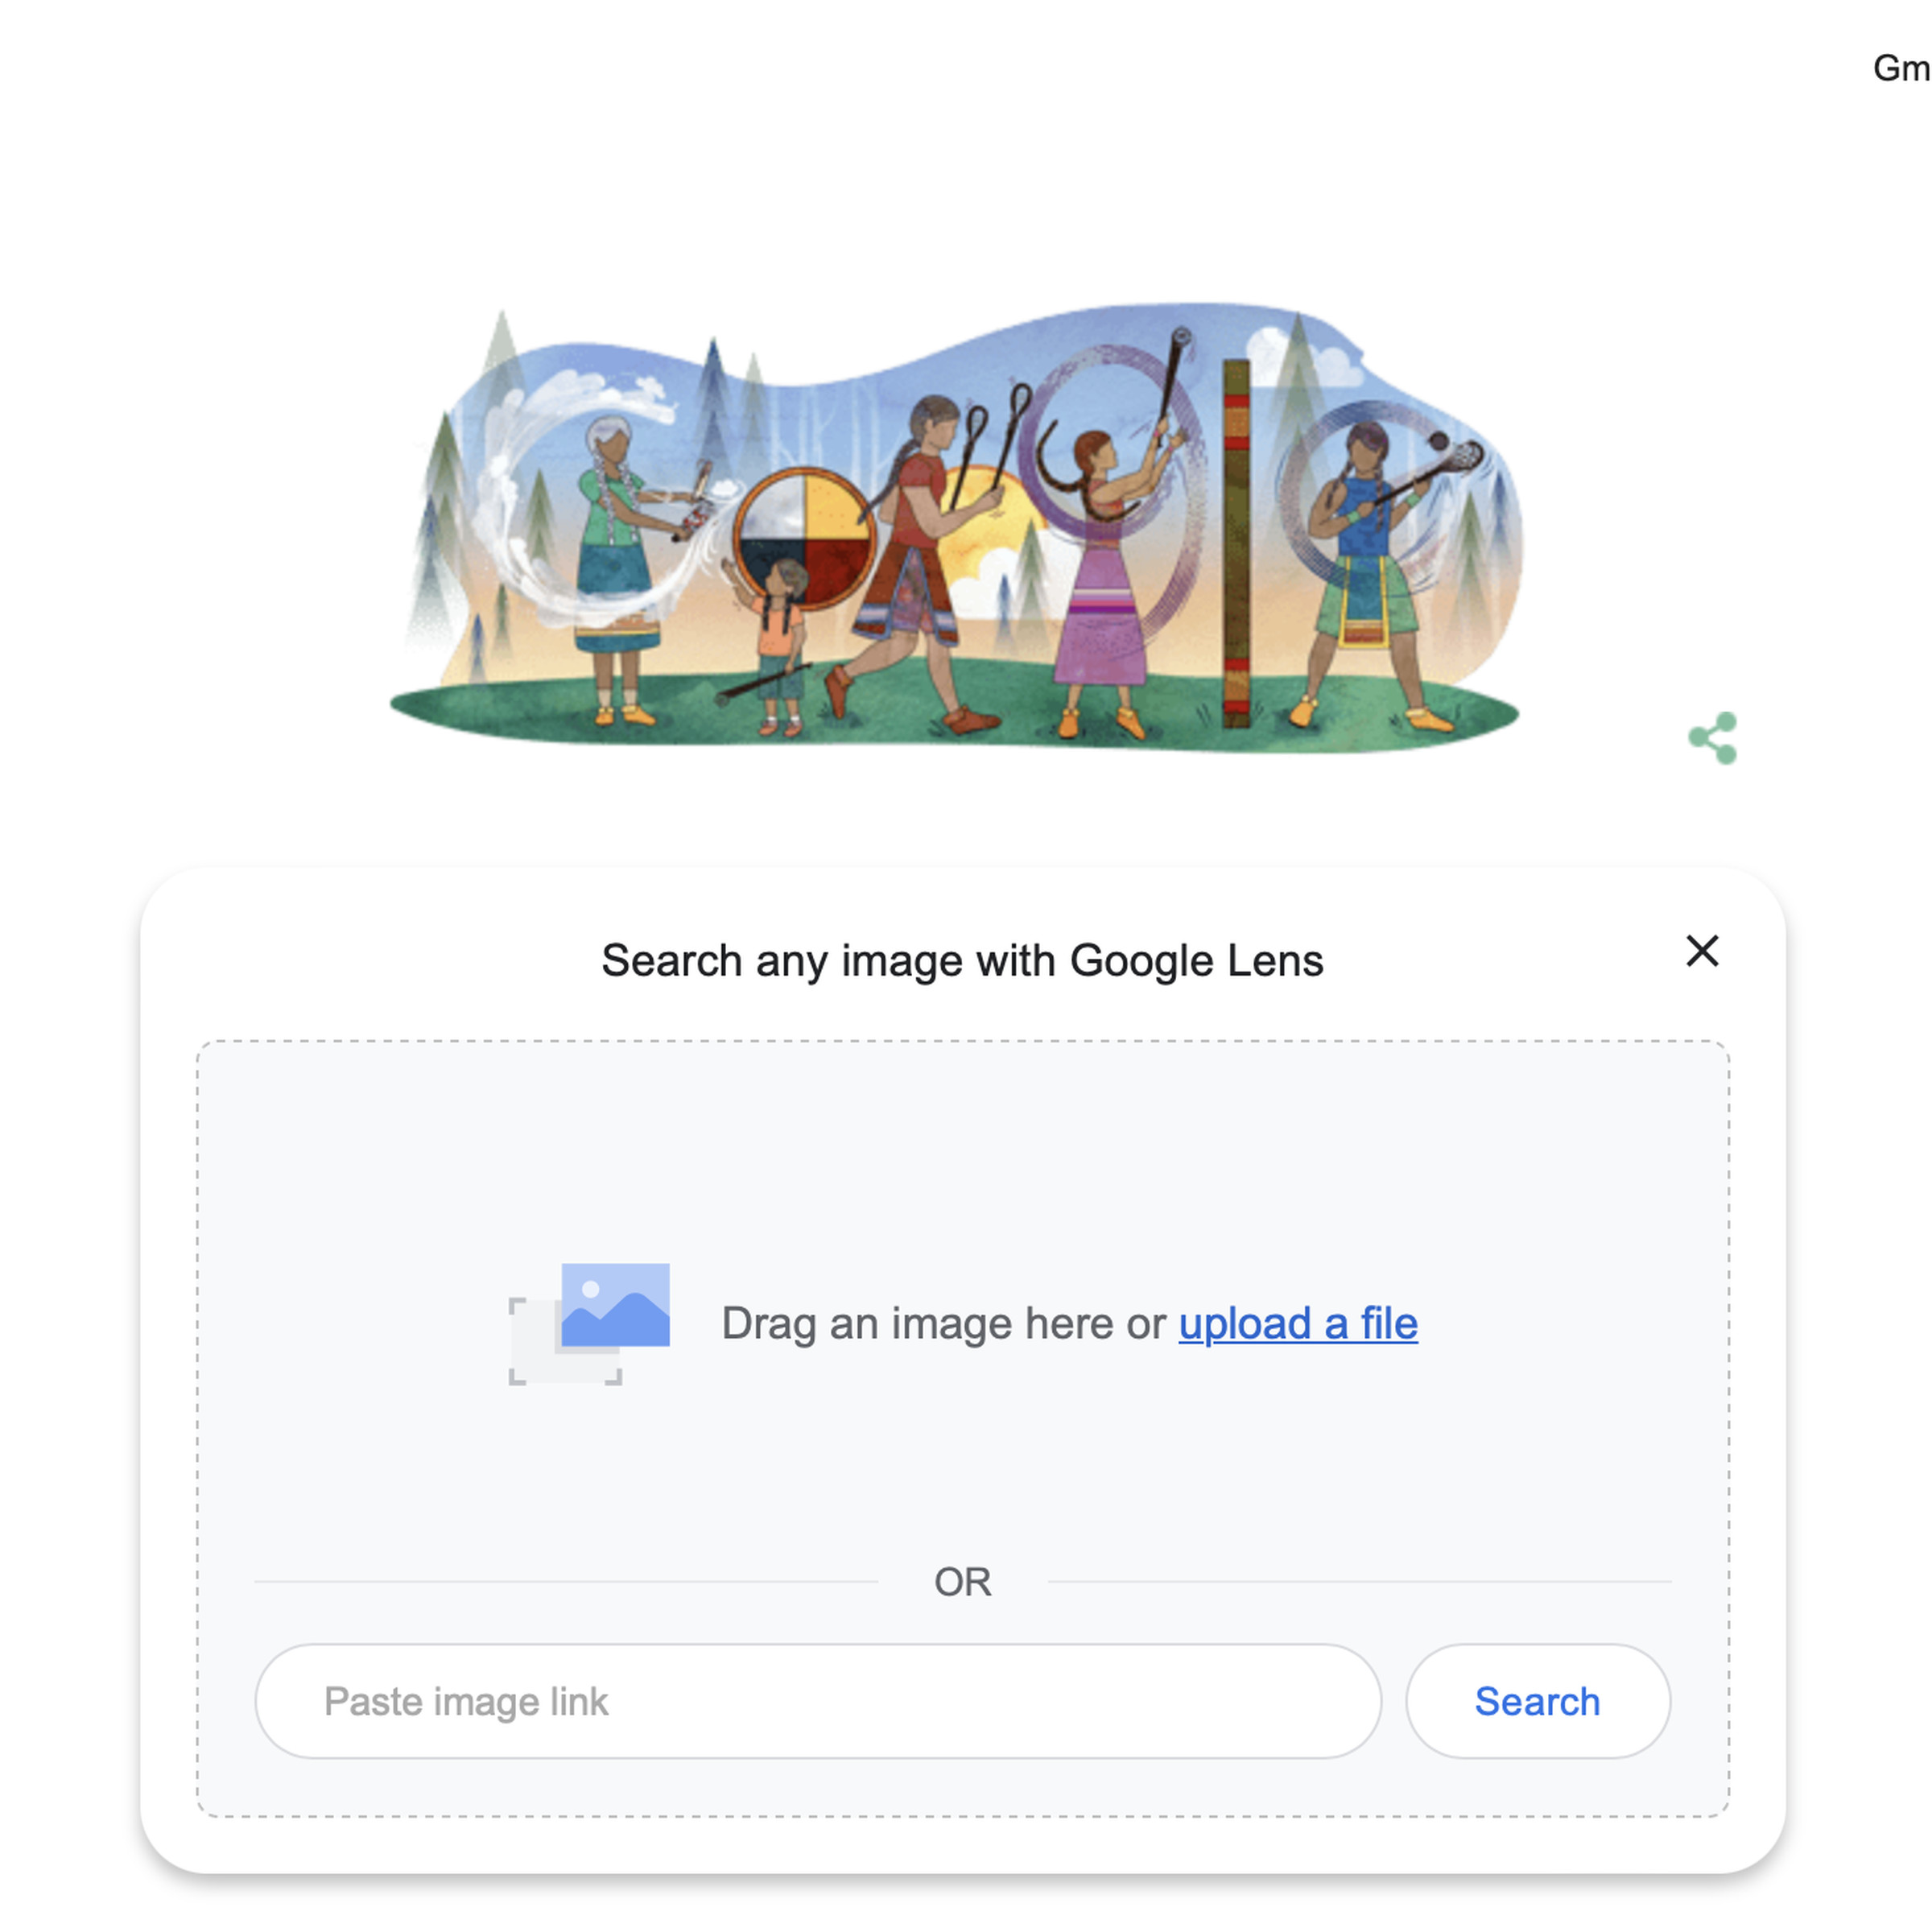 Screenshot of the Google homepage, showing the search image with Lens box.